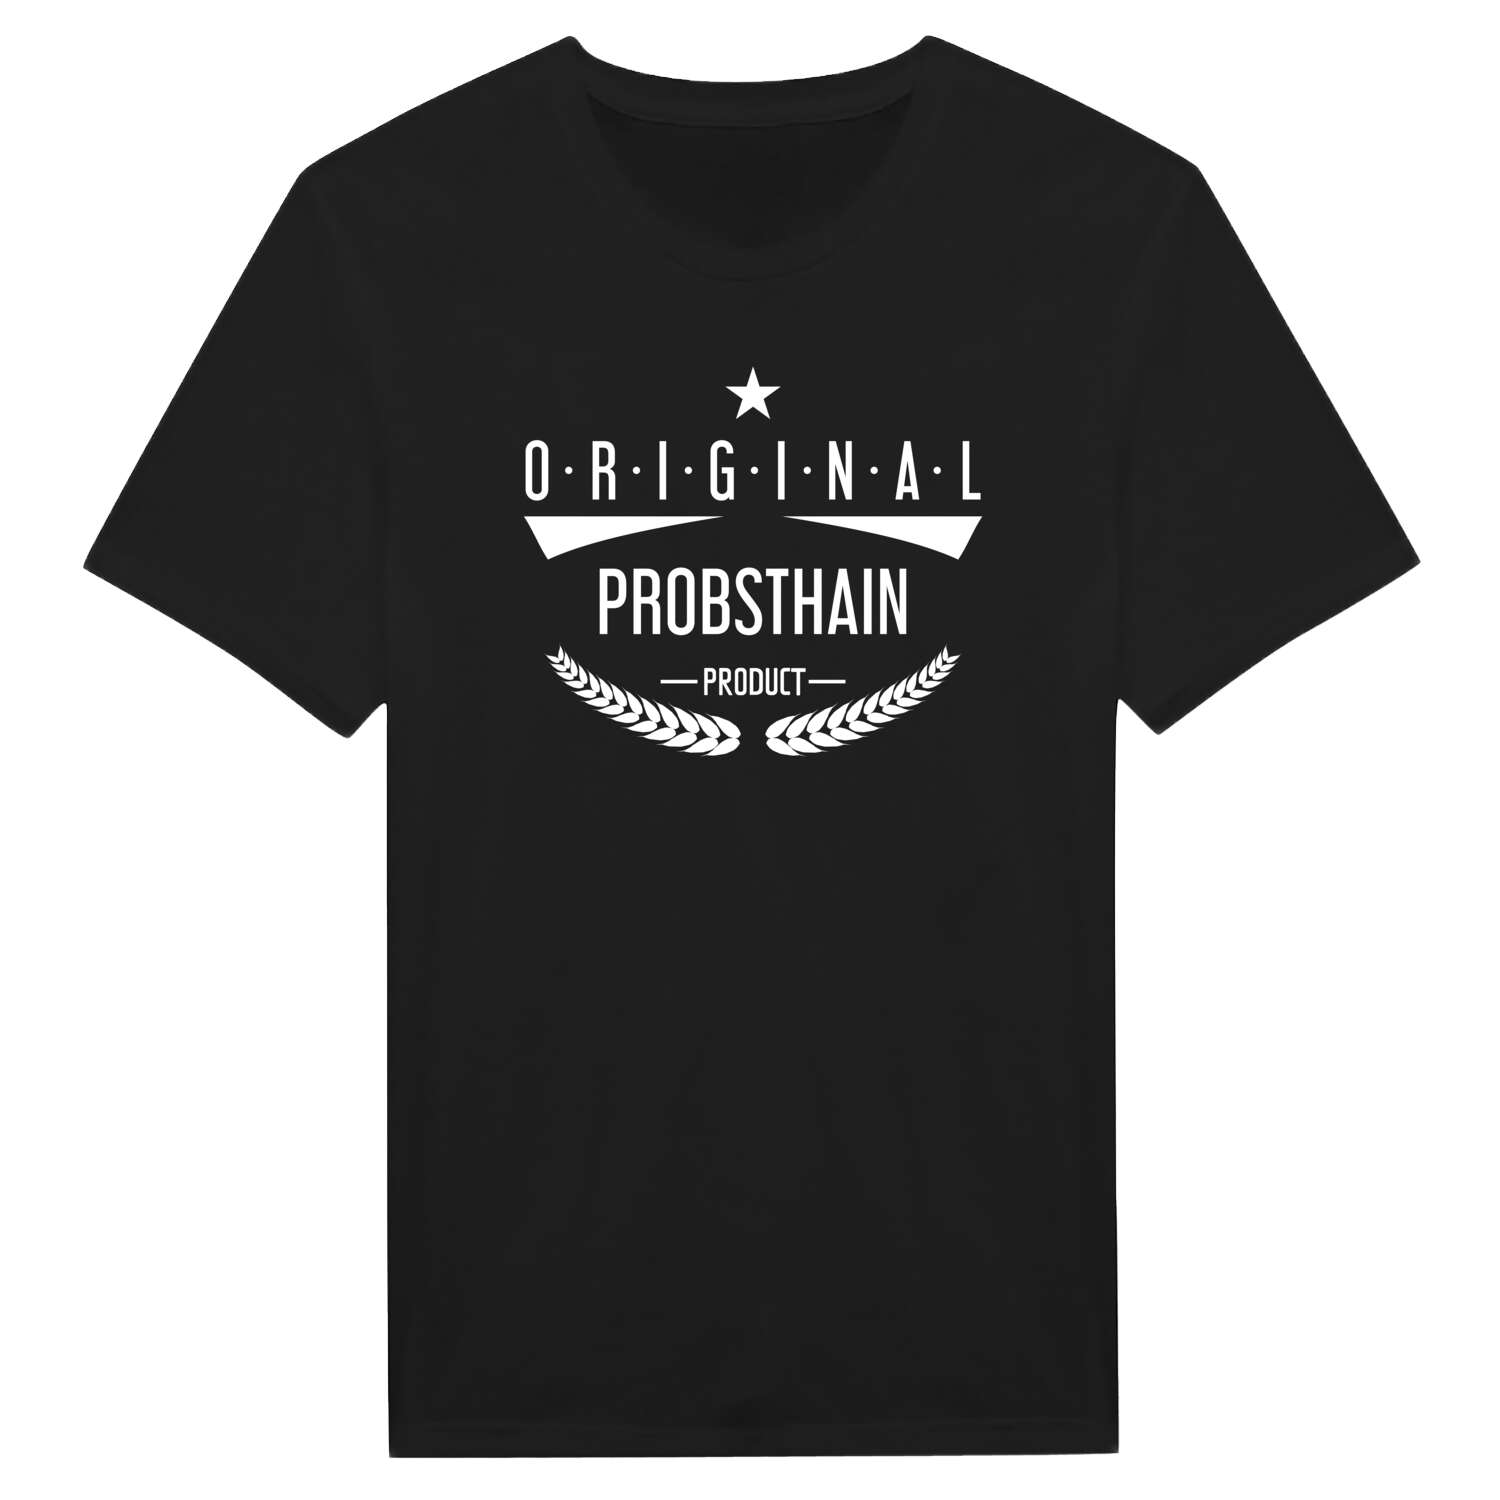 Probsthain T-Shirt »Original Product«